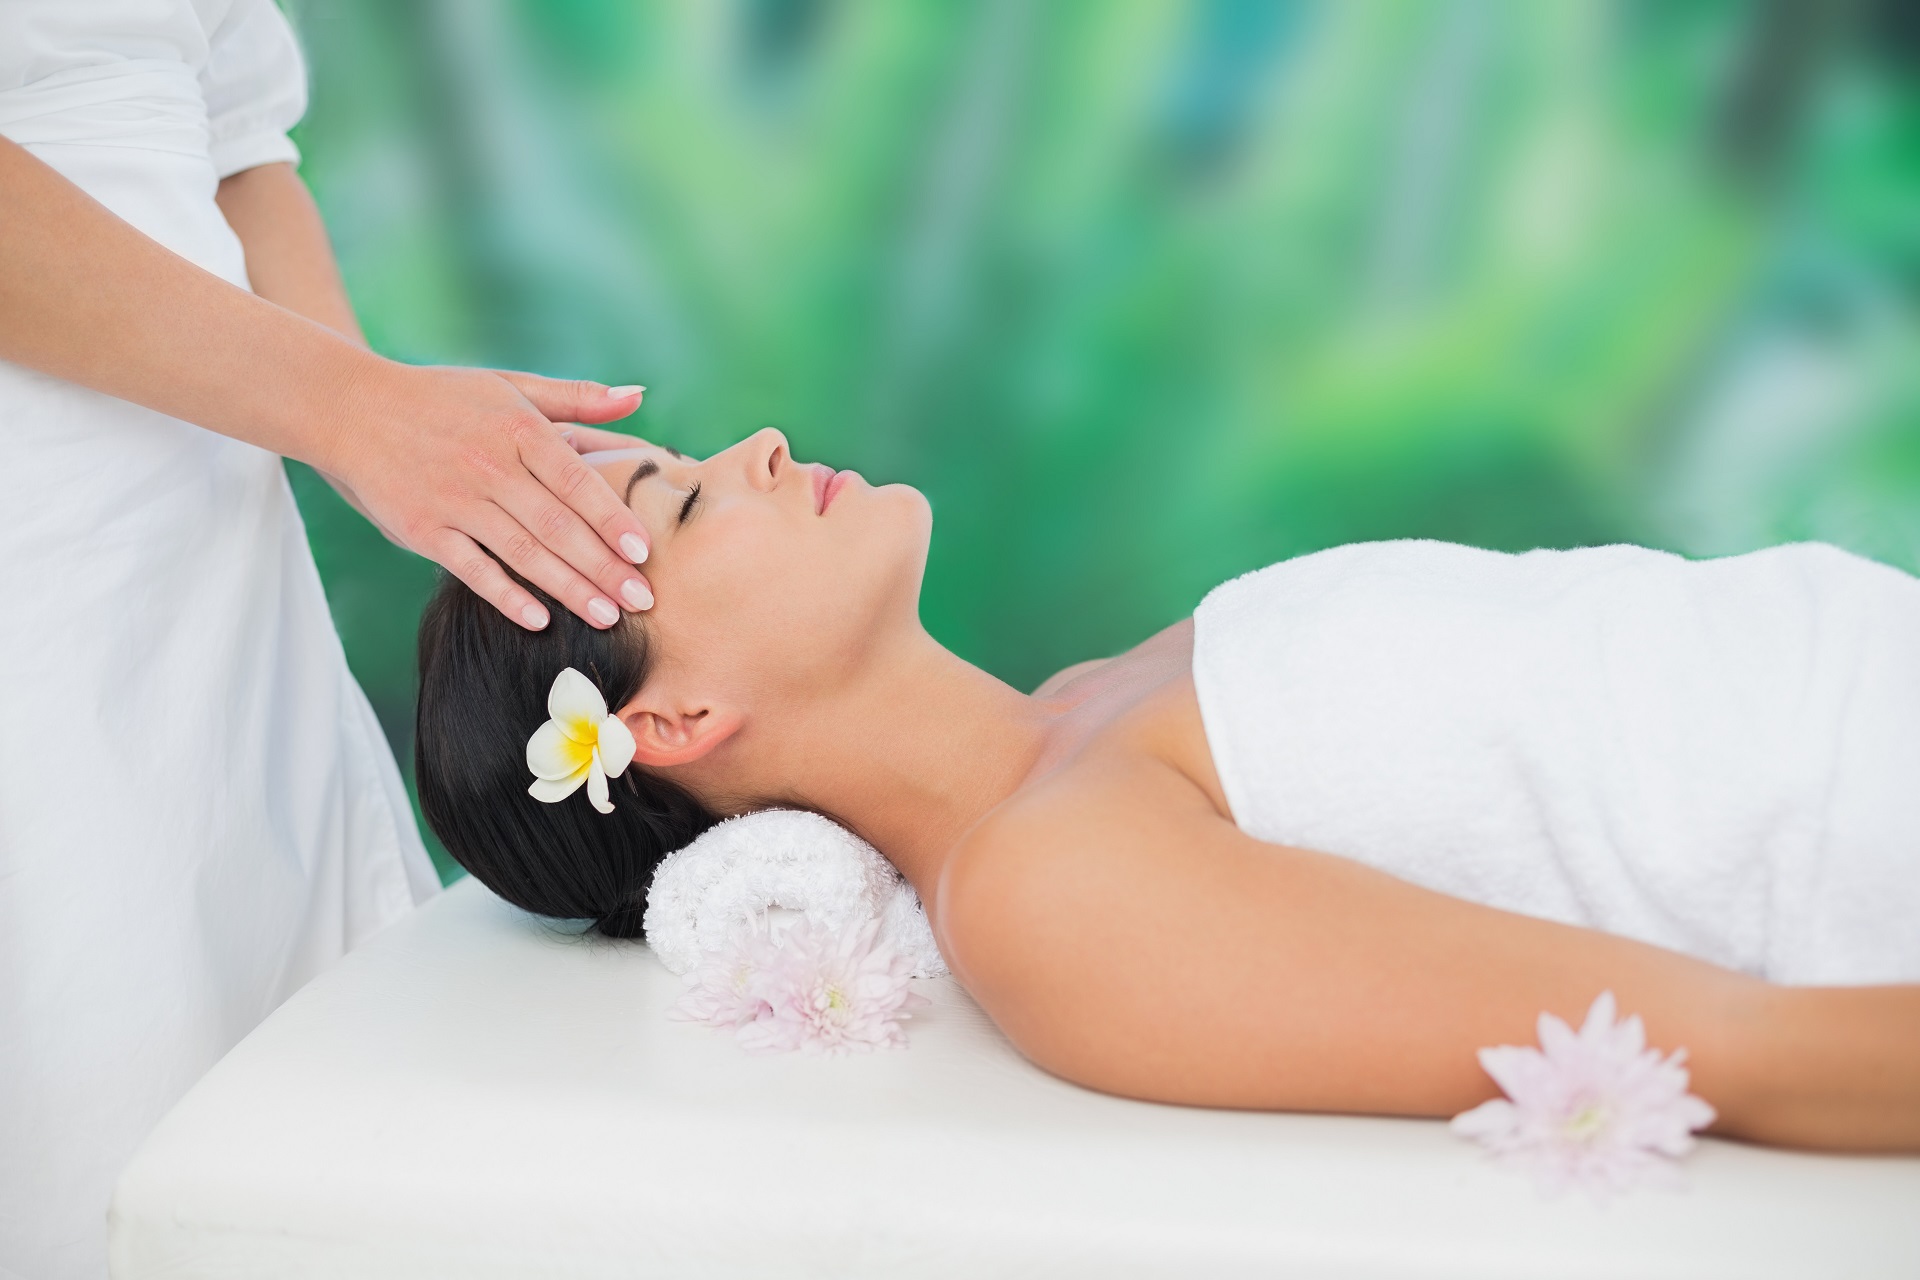 Reasons To Explore Registered Massage Therapy